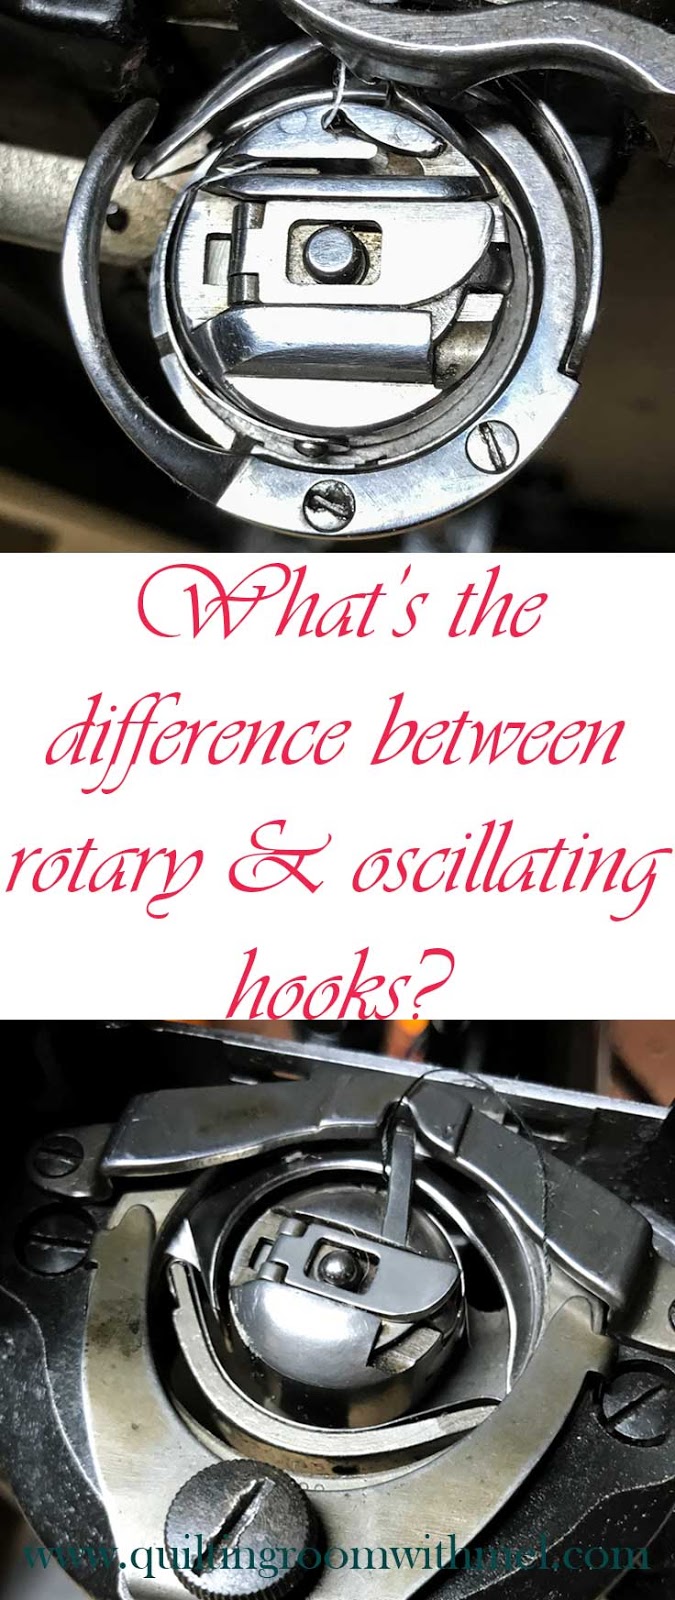 difference between rotary and oscillating hooks